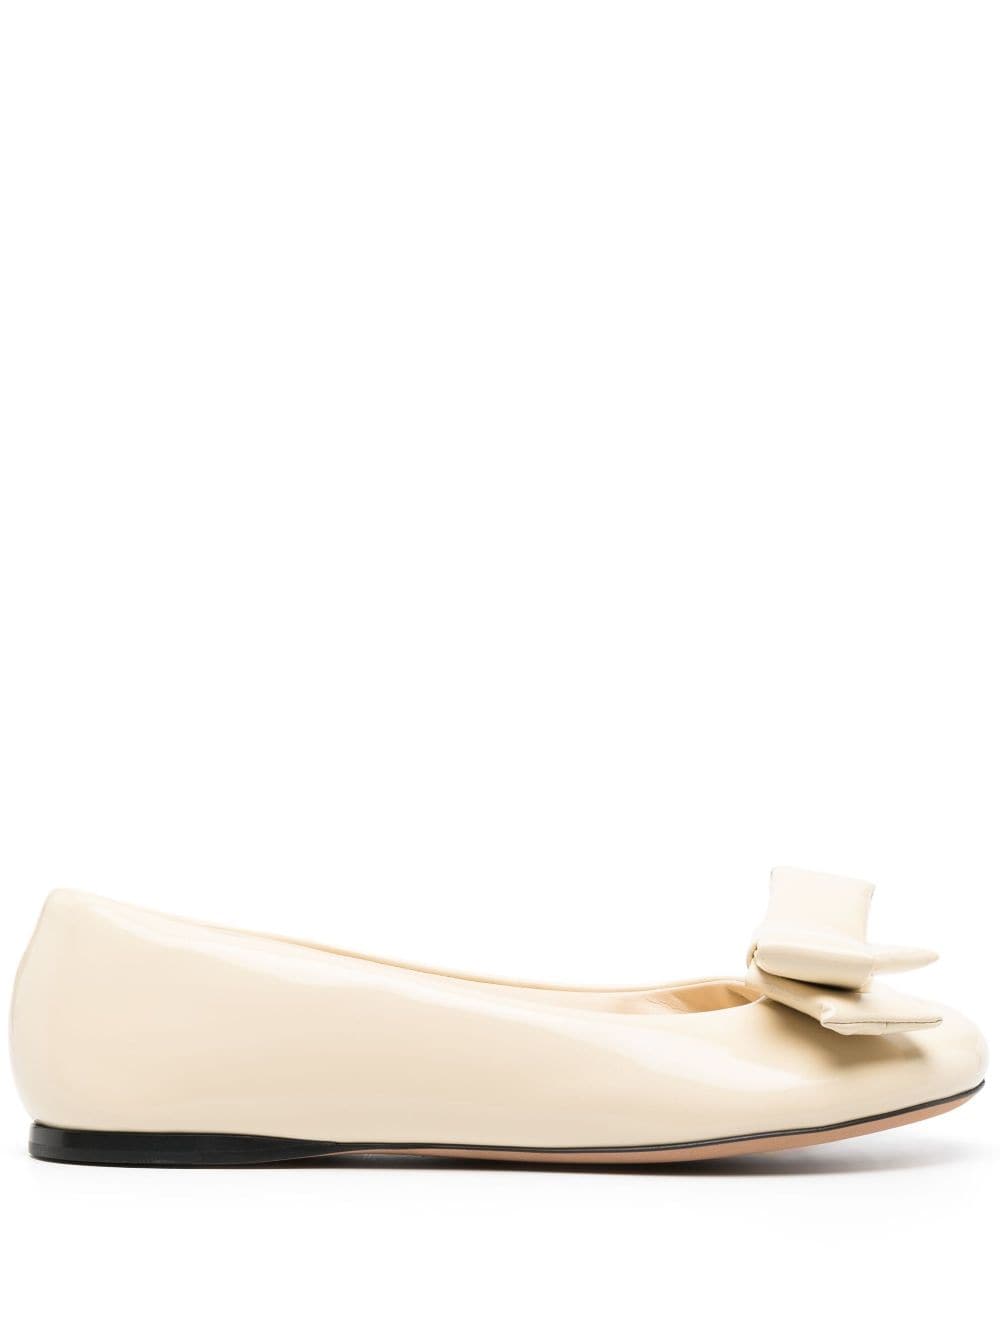 Loewe Puffy Leather Ballerina Shoes In Neutrals